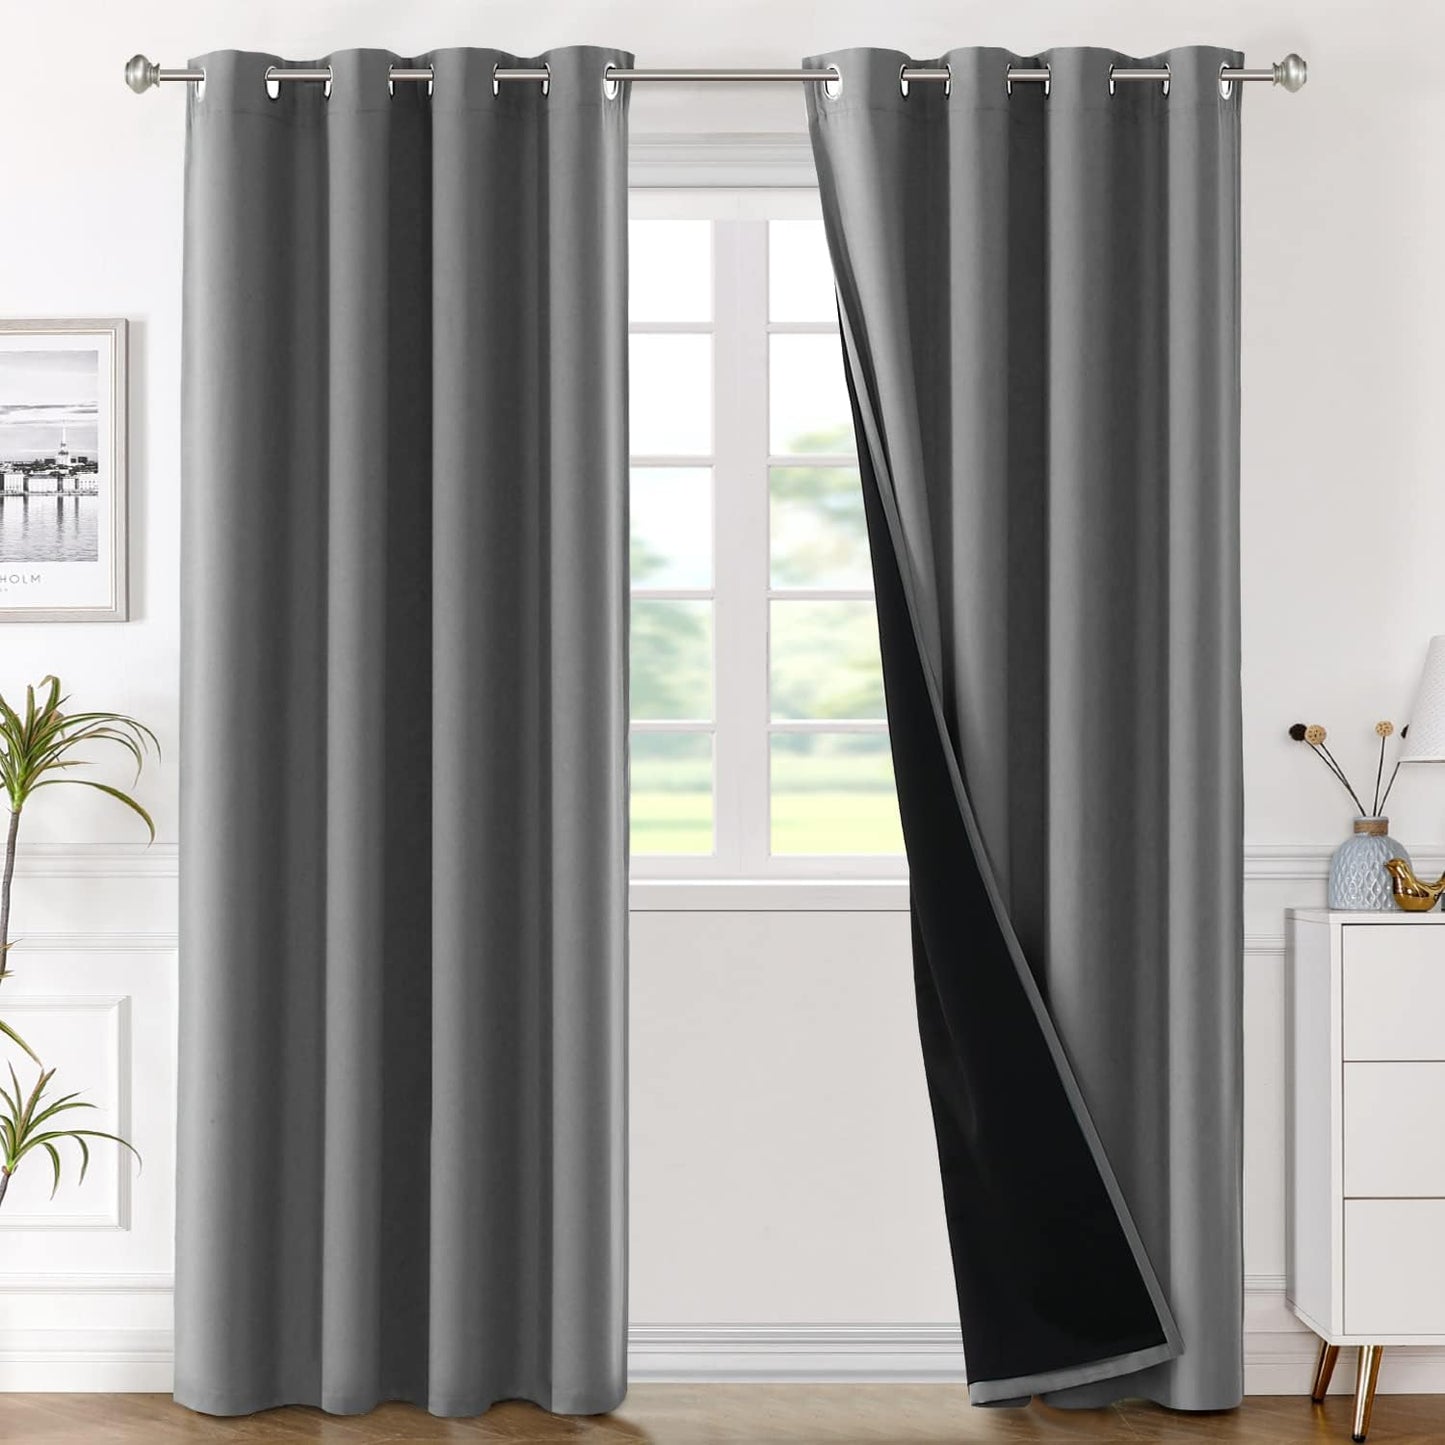 H.VERSAILTEX Blackout Curtains with Liner Backing, Thermal Insulated Curtains for Living Room, Noise Reducing Drapes, White, 52 Inches Wide X 96 Inches Long per Panel, Set of 2 Panels  H.VERSAILTEX Charcoal Gray 52"W X 96"L 